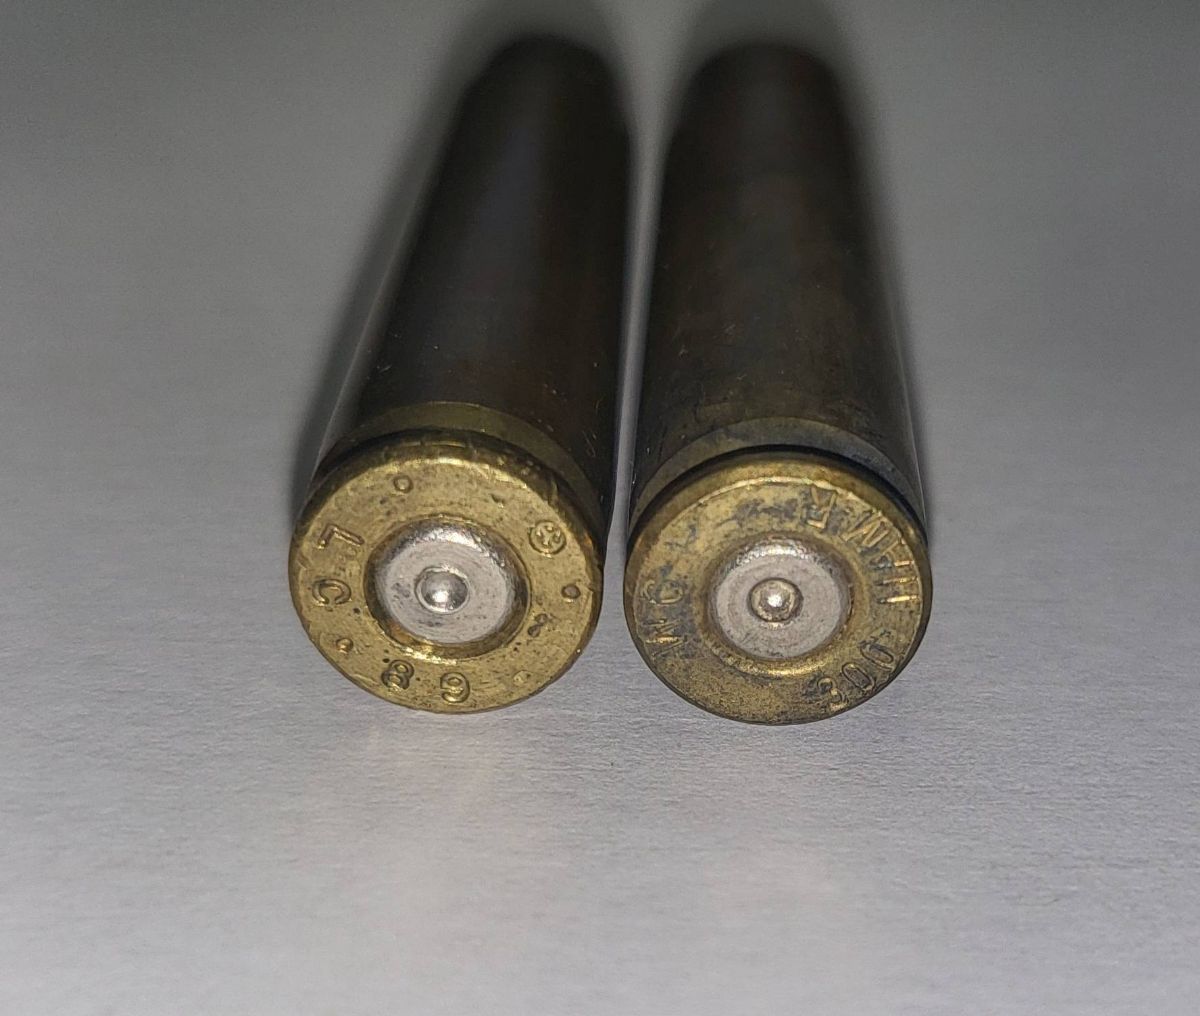 Part 3 – Top 11 Myths and Truths when comparing 7.62x39mm Steel vs.  Brass-Cased Ammunition